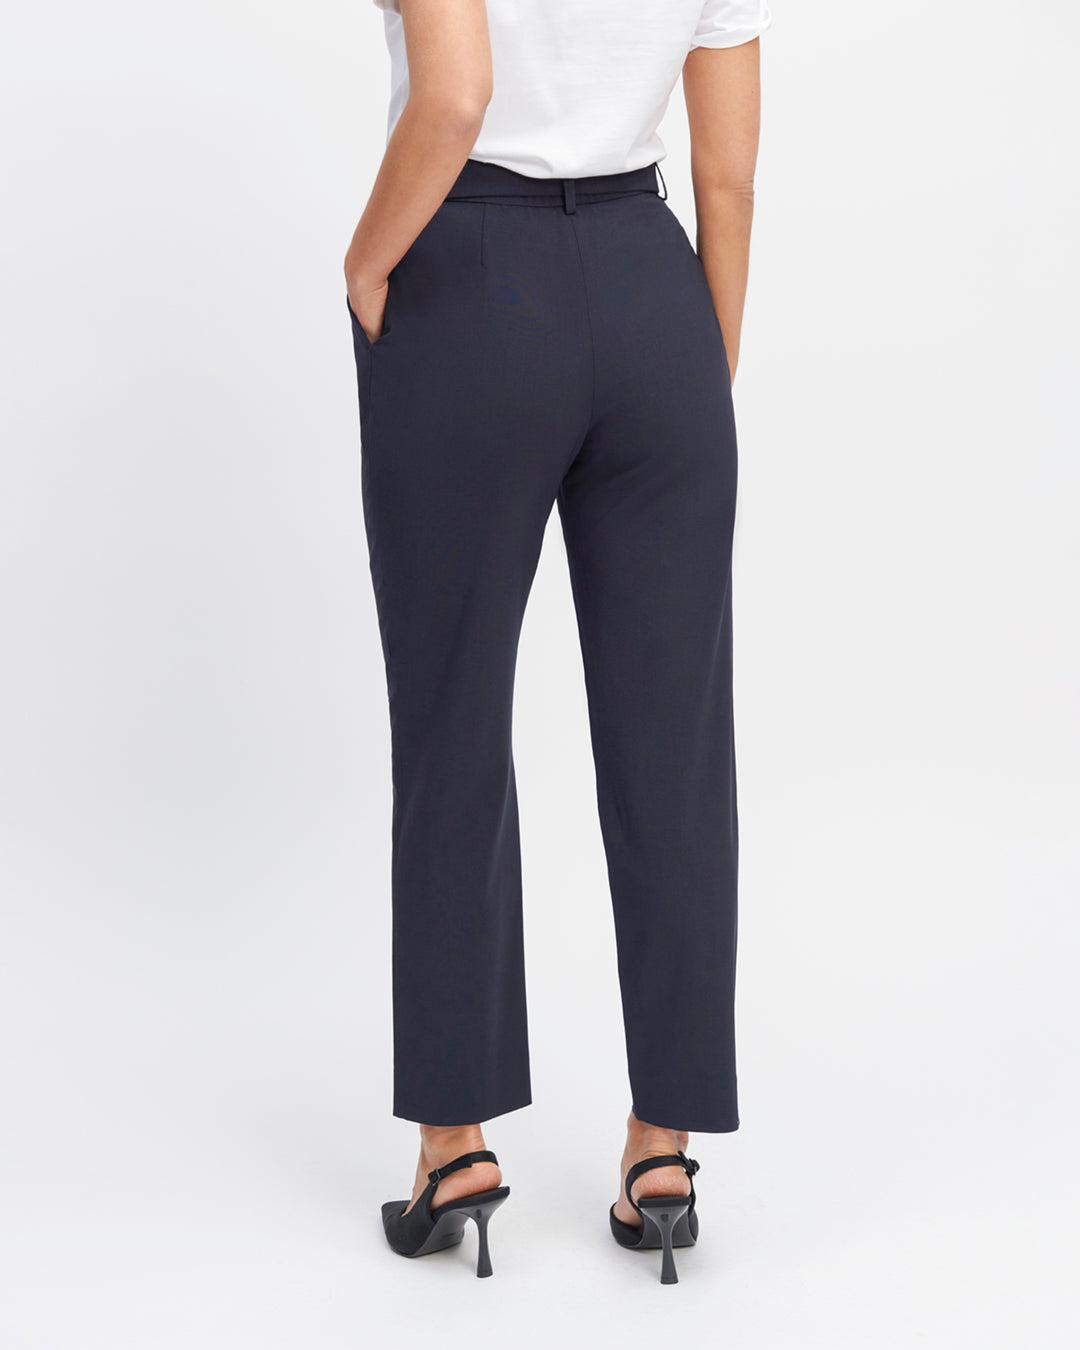 "Tailored pants in navy blue-7-8th waist-high-Loop-under-belt-Two-pockets-Italian-style-Belt-assorted-tone-on-tone-Zip-close-staple-before-17H10-tailors-for-women-paris-"